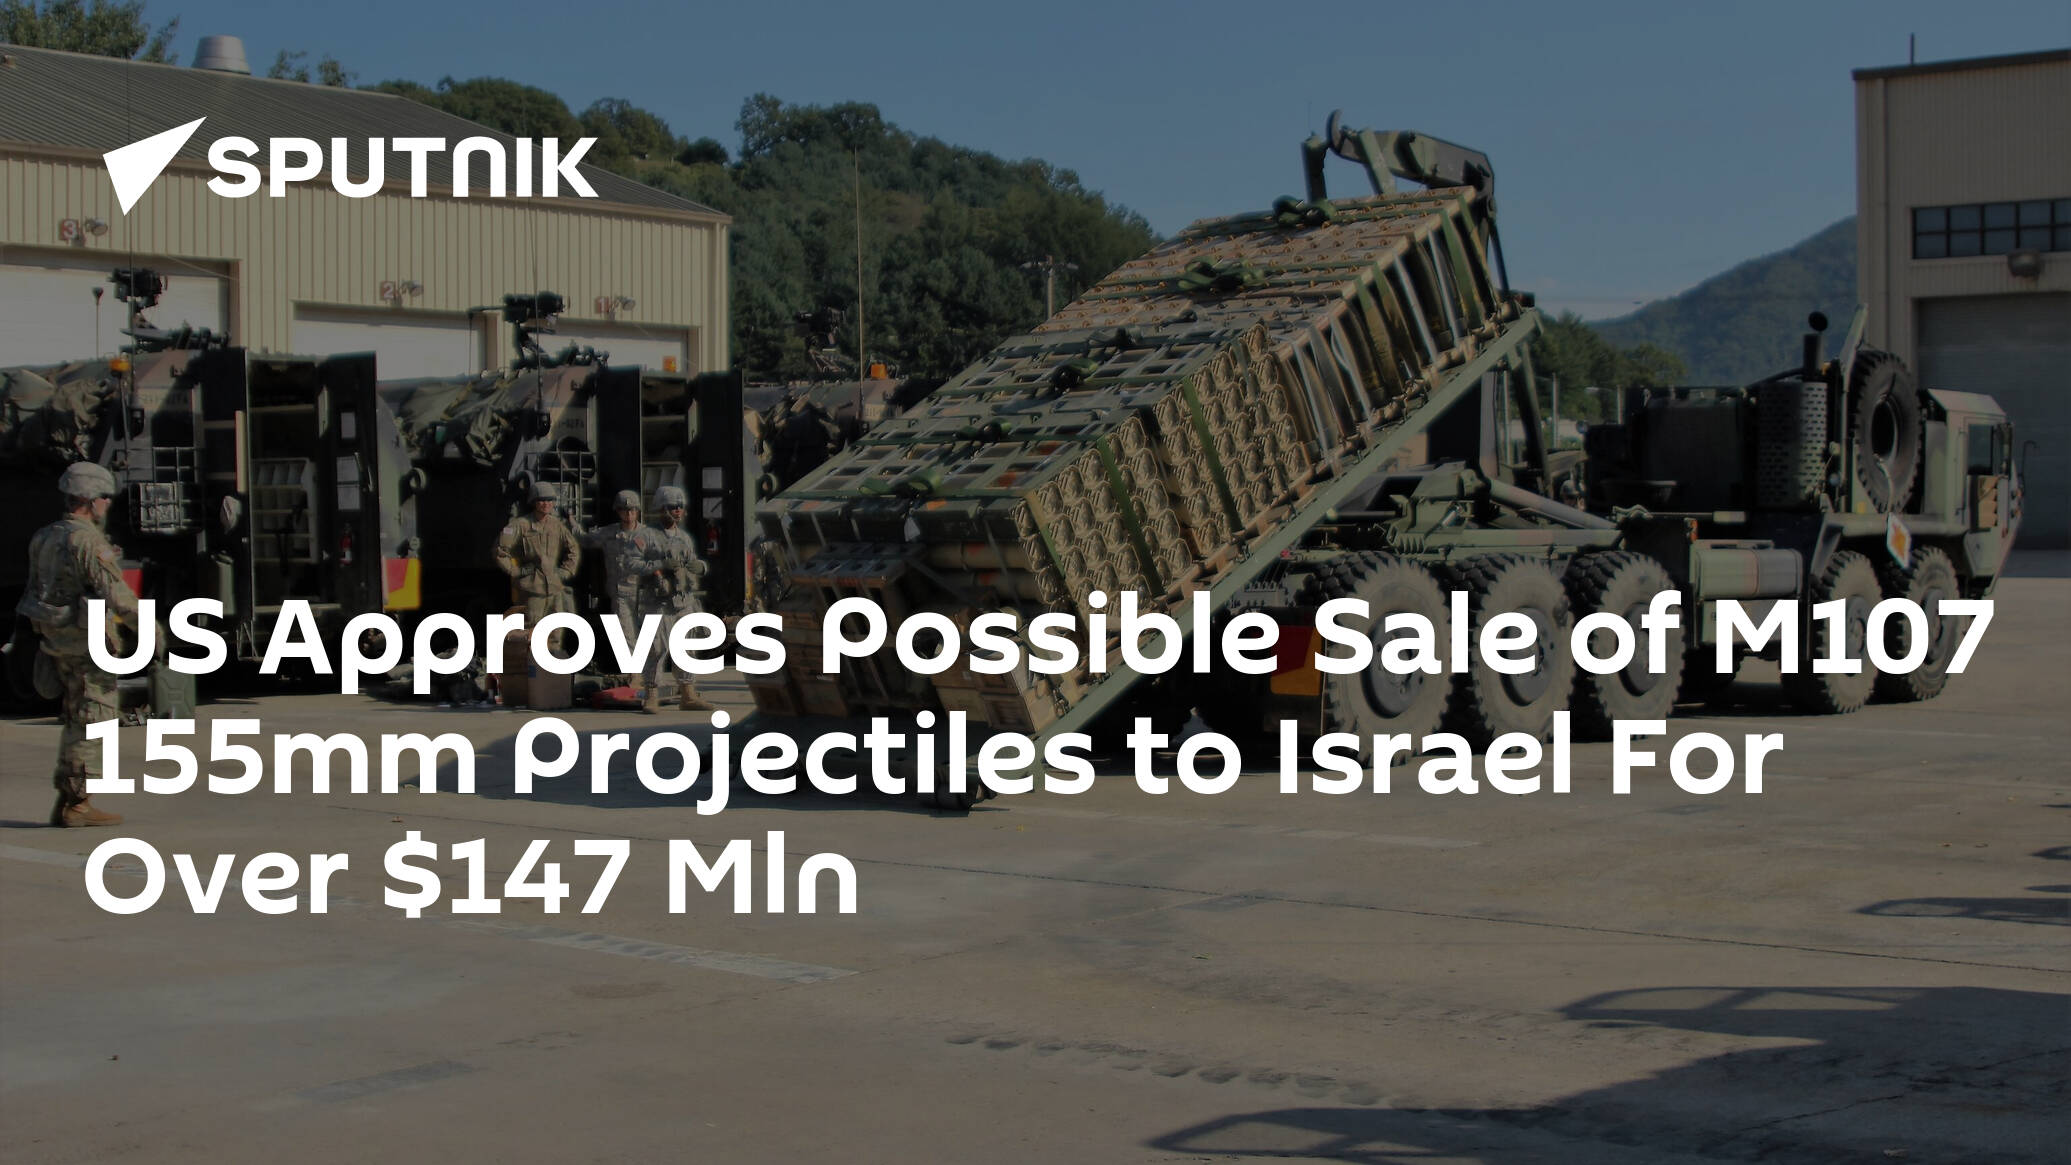 US Approves Possible Sale of M107 155mm Projectiles to Israel For Over 7 Mln